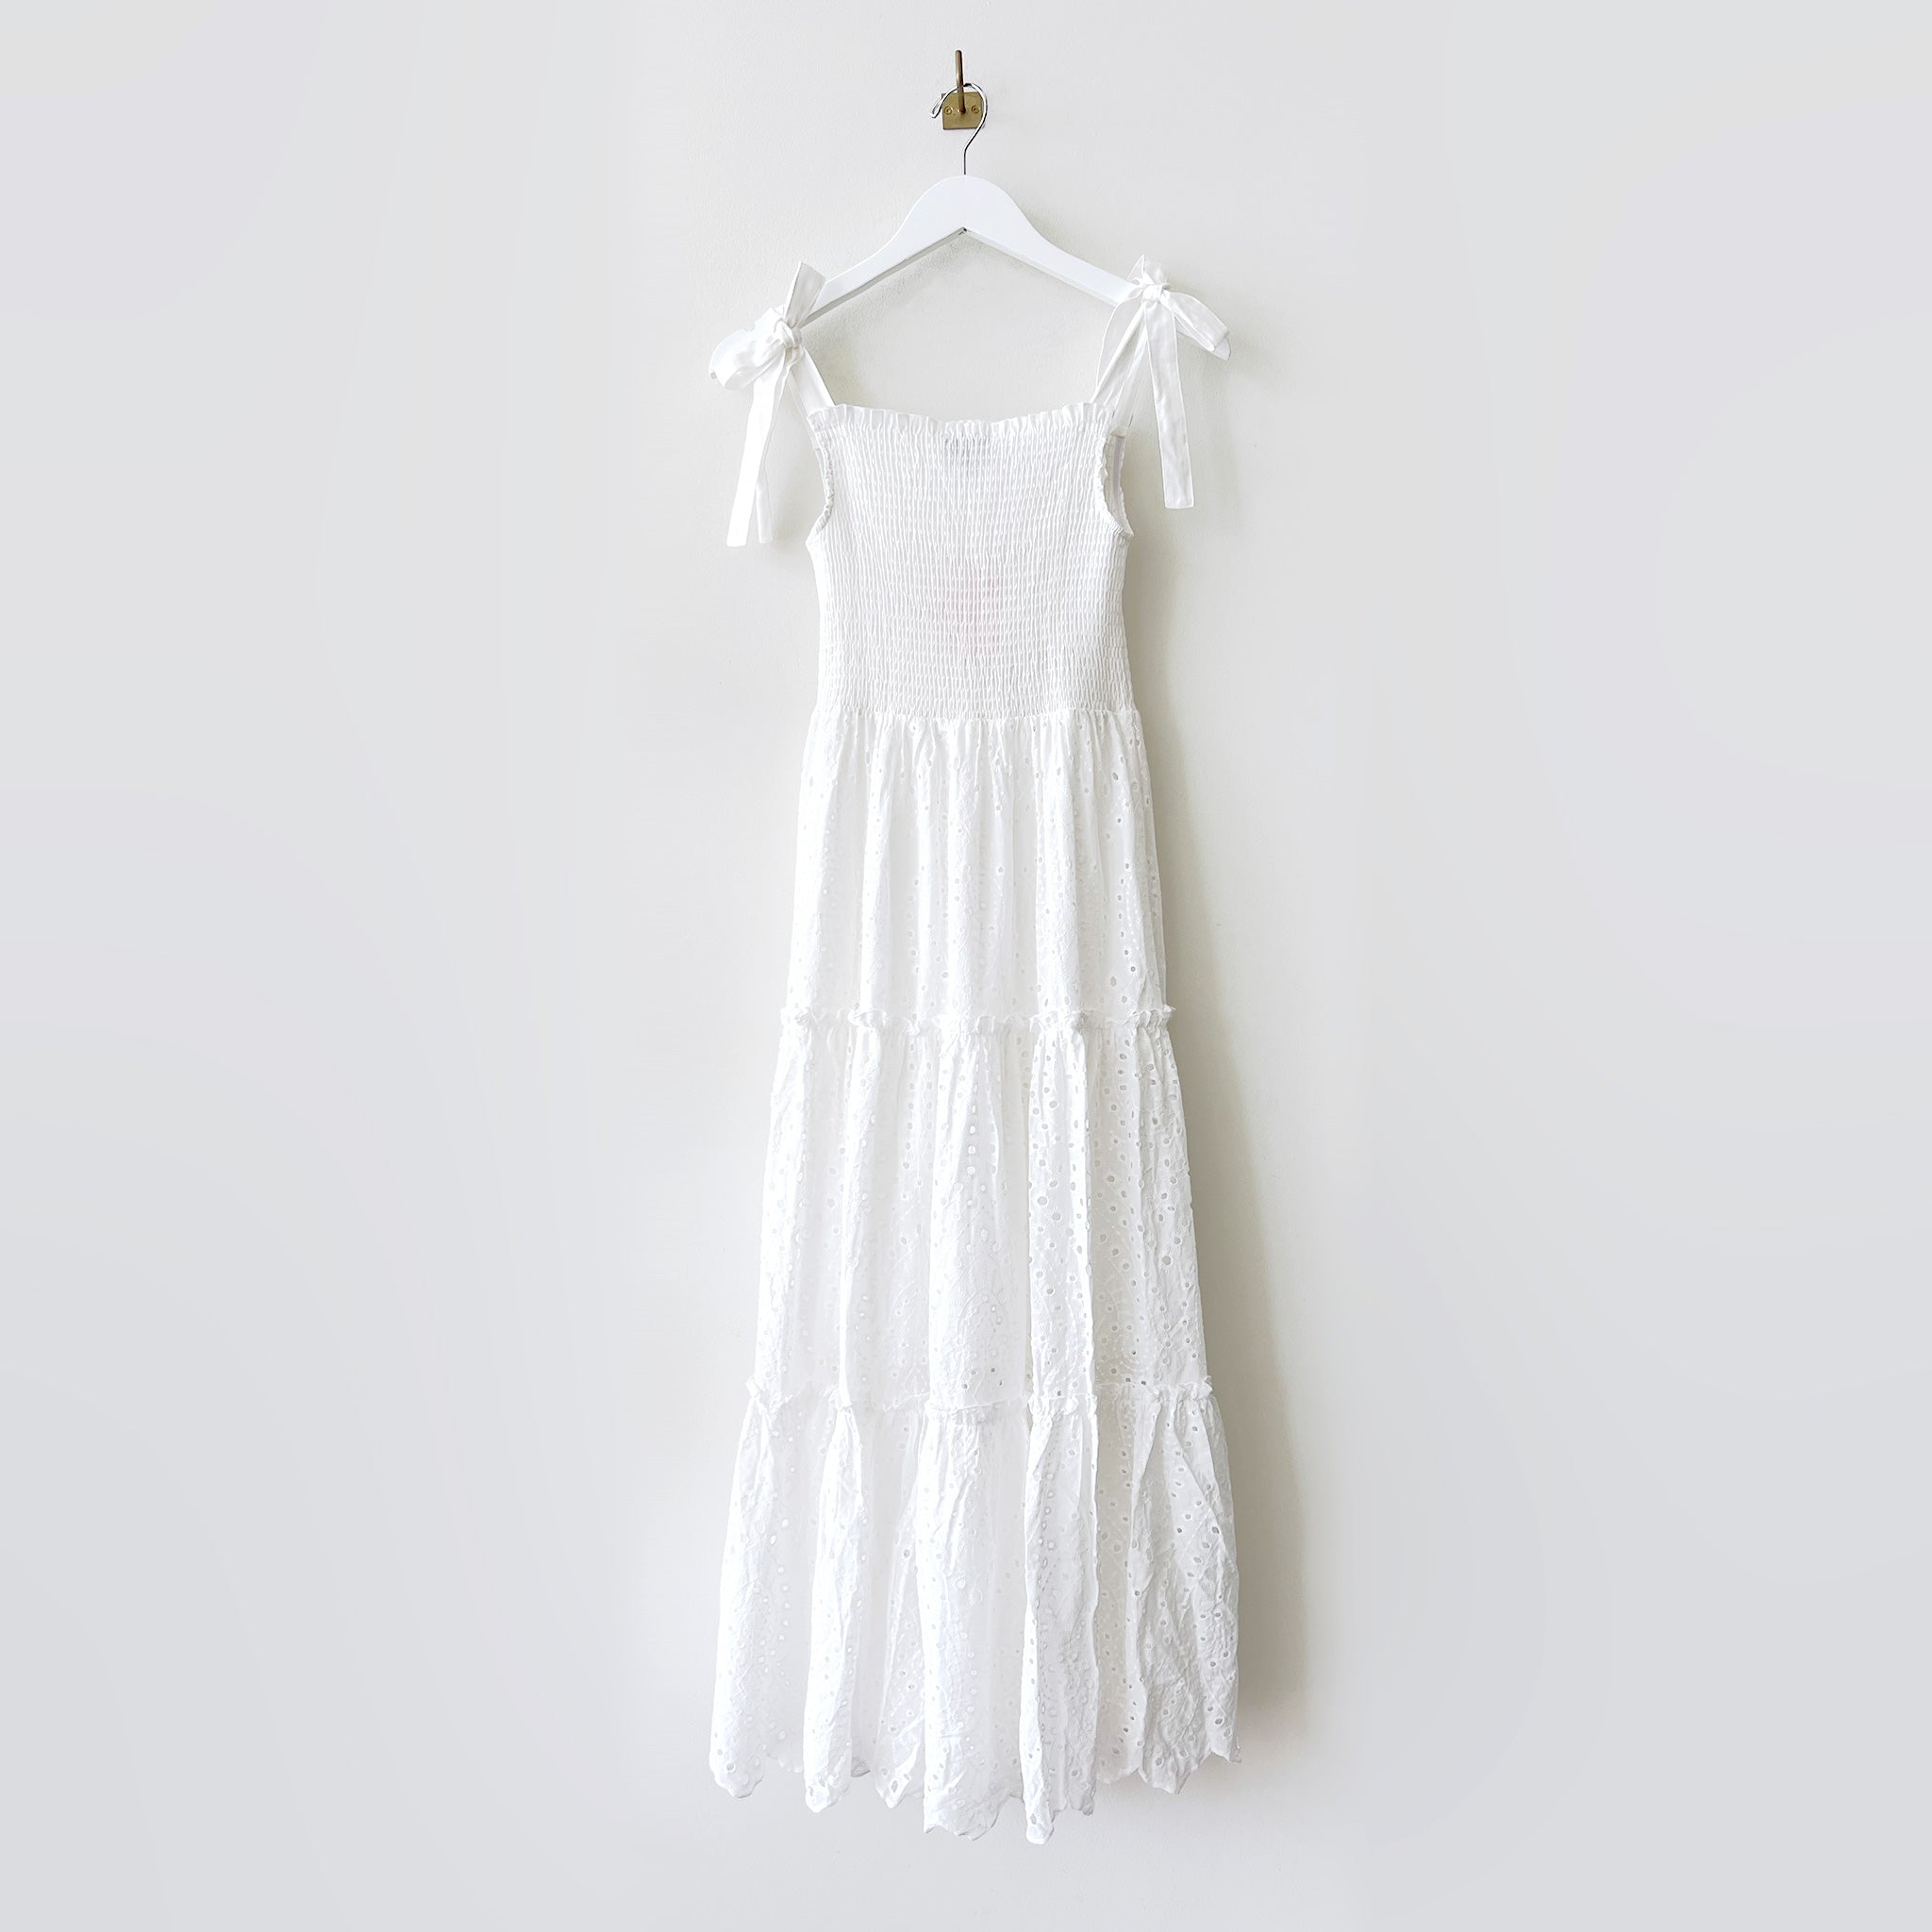 Long white dress with ruched bodice, ribbon tied shoulder straps and tiered eyelet skirt - back view.